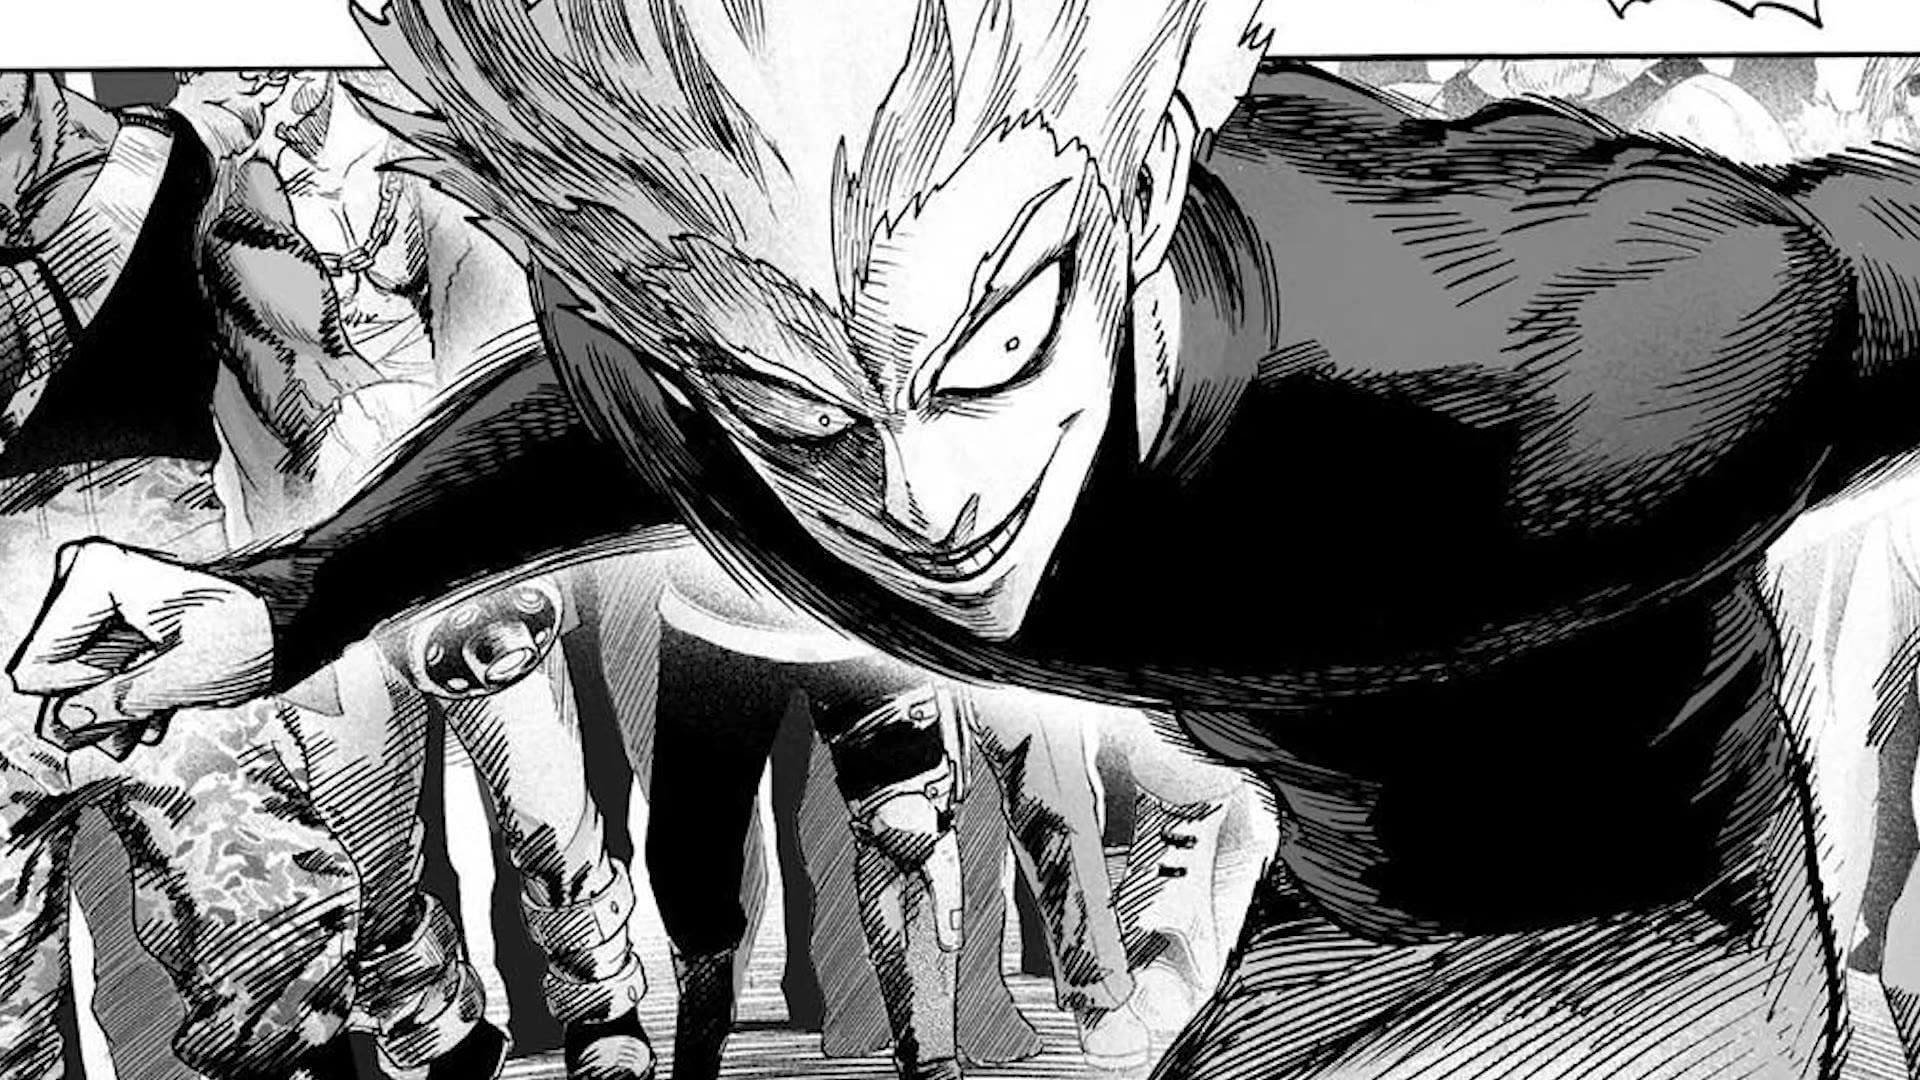 Will Garou fight Saitama in the upcoming chapter of One Punch Man (Image via One Punch Man)